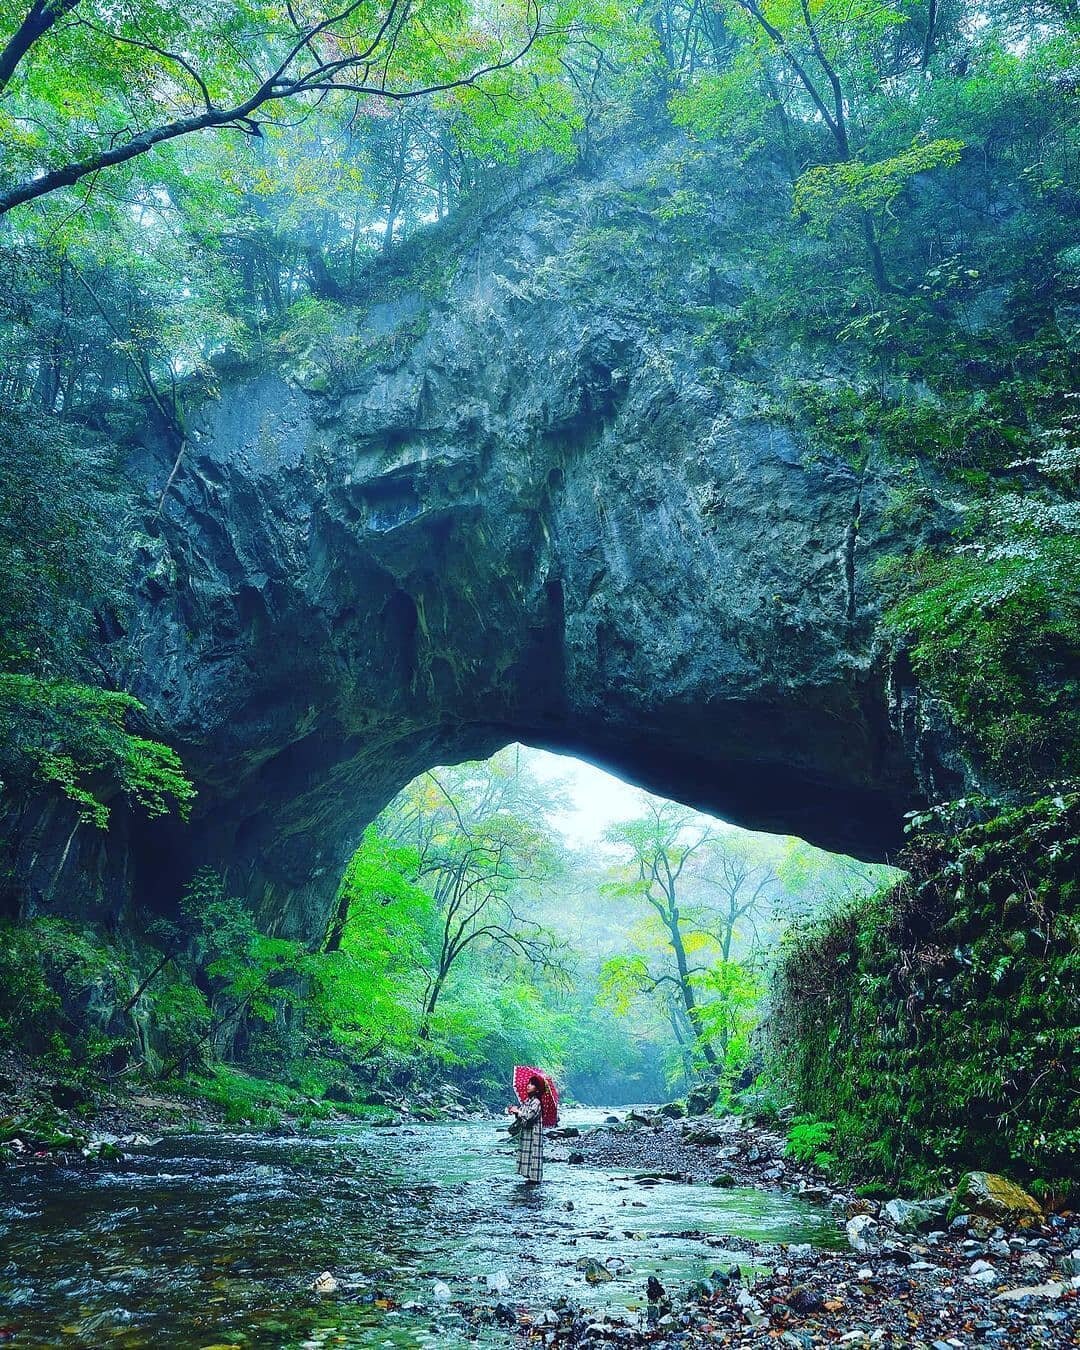 From your kominka holiday house in Shobara visit Taishakukyo Gorge, a quasi-national park with hiking trails. This 18 km long valley is in the center of the Chugoku Mountains. Walk your way to this huge natural rock formation called Onbashi Bridge. W